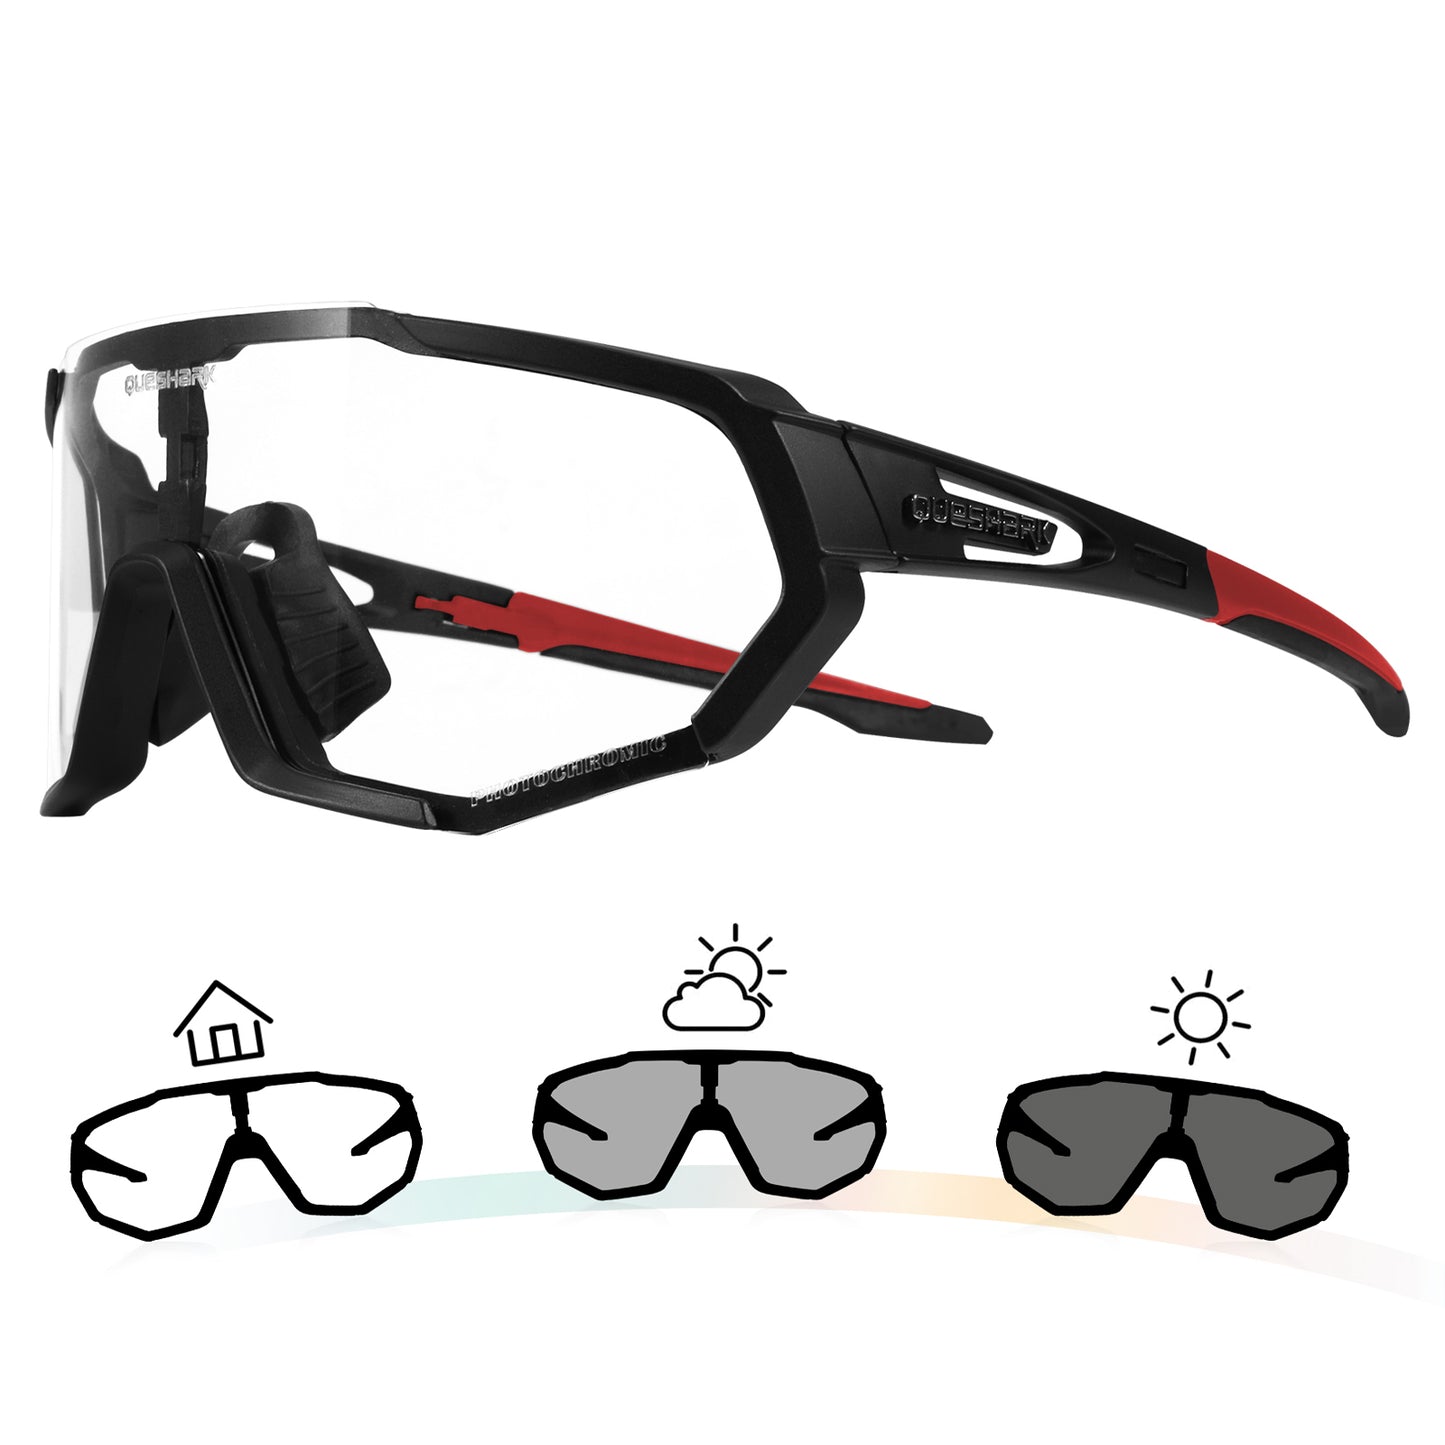 QE48 BS Queshark Photochromic Sunglasses for Men Women Safety Cycling Glasses UV Protection Outdoor   Sport MTB Black Red